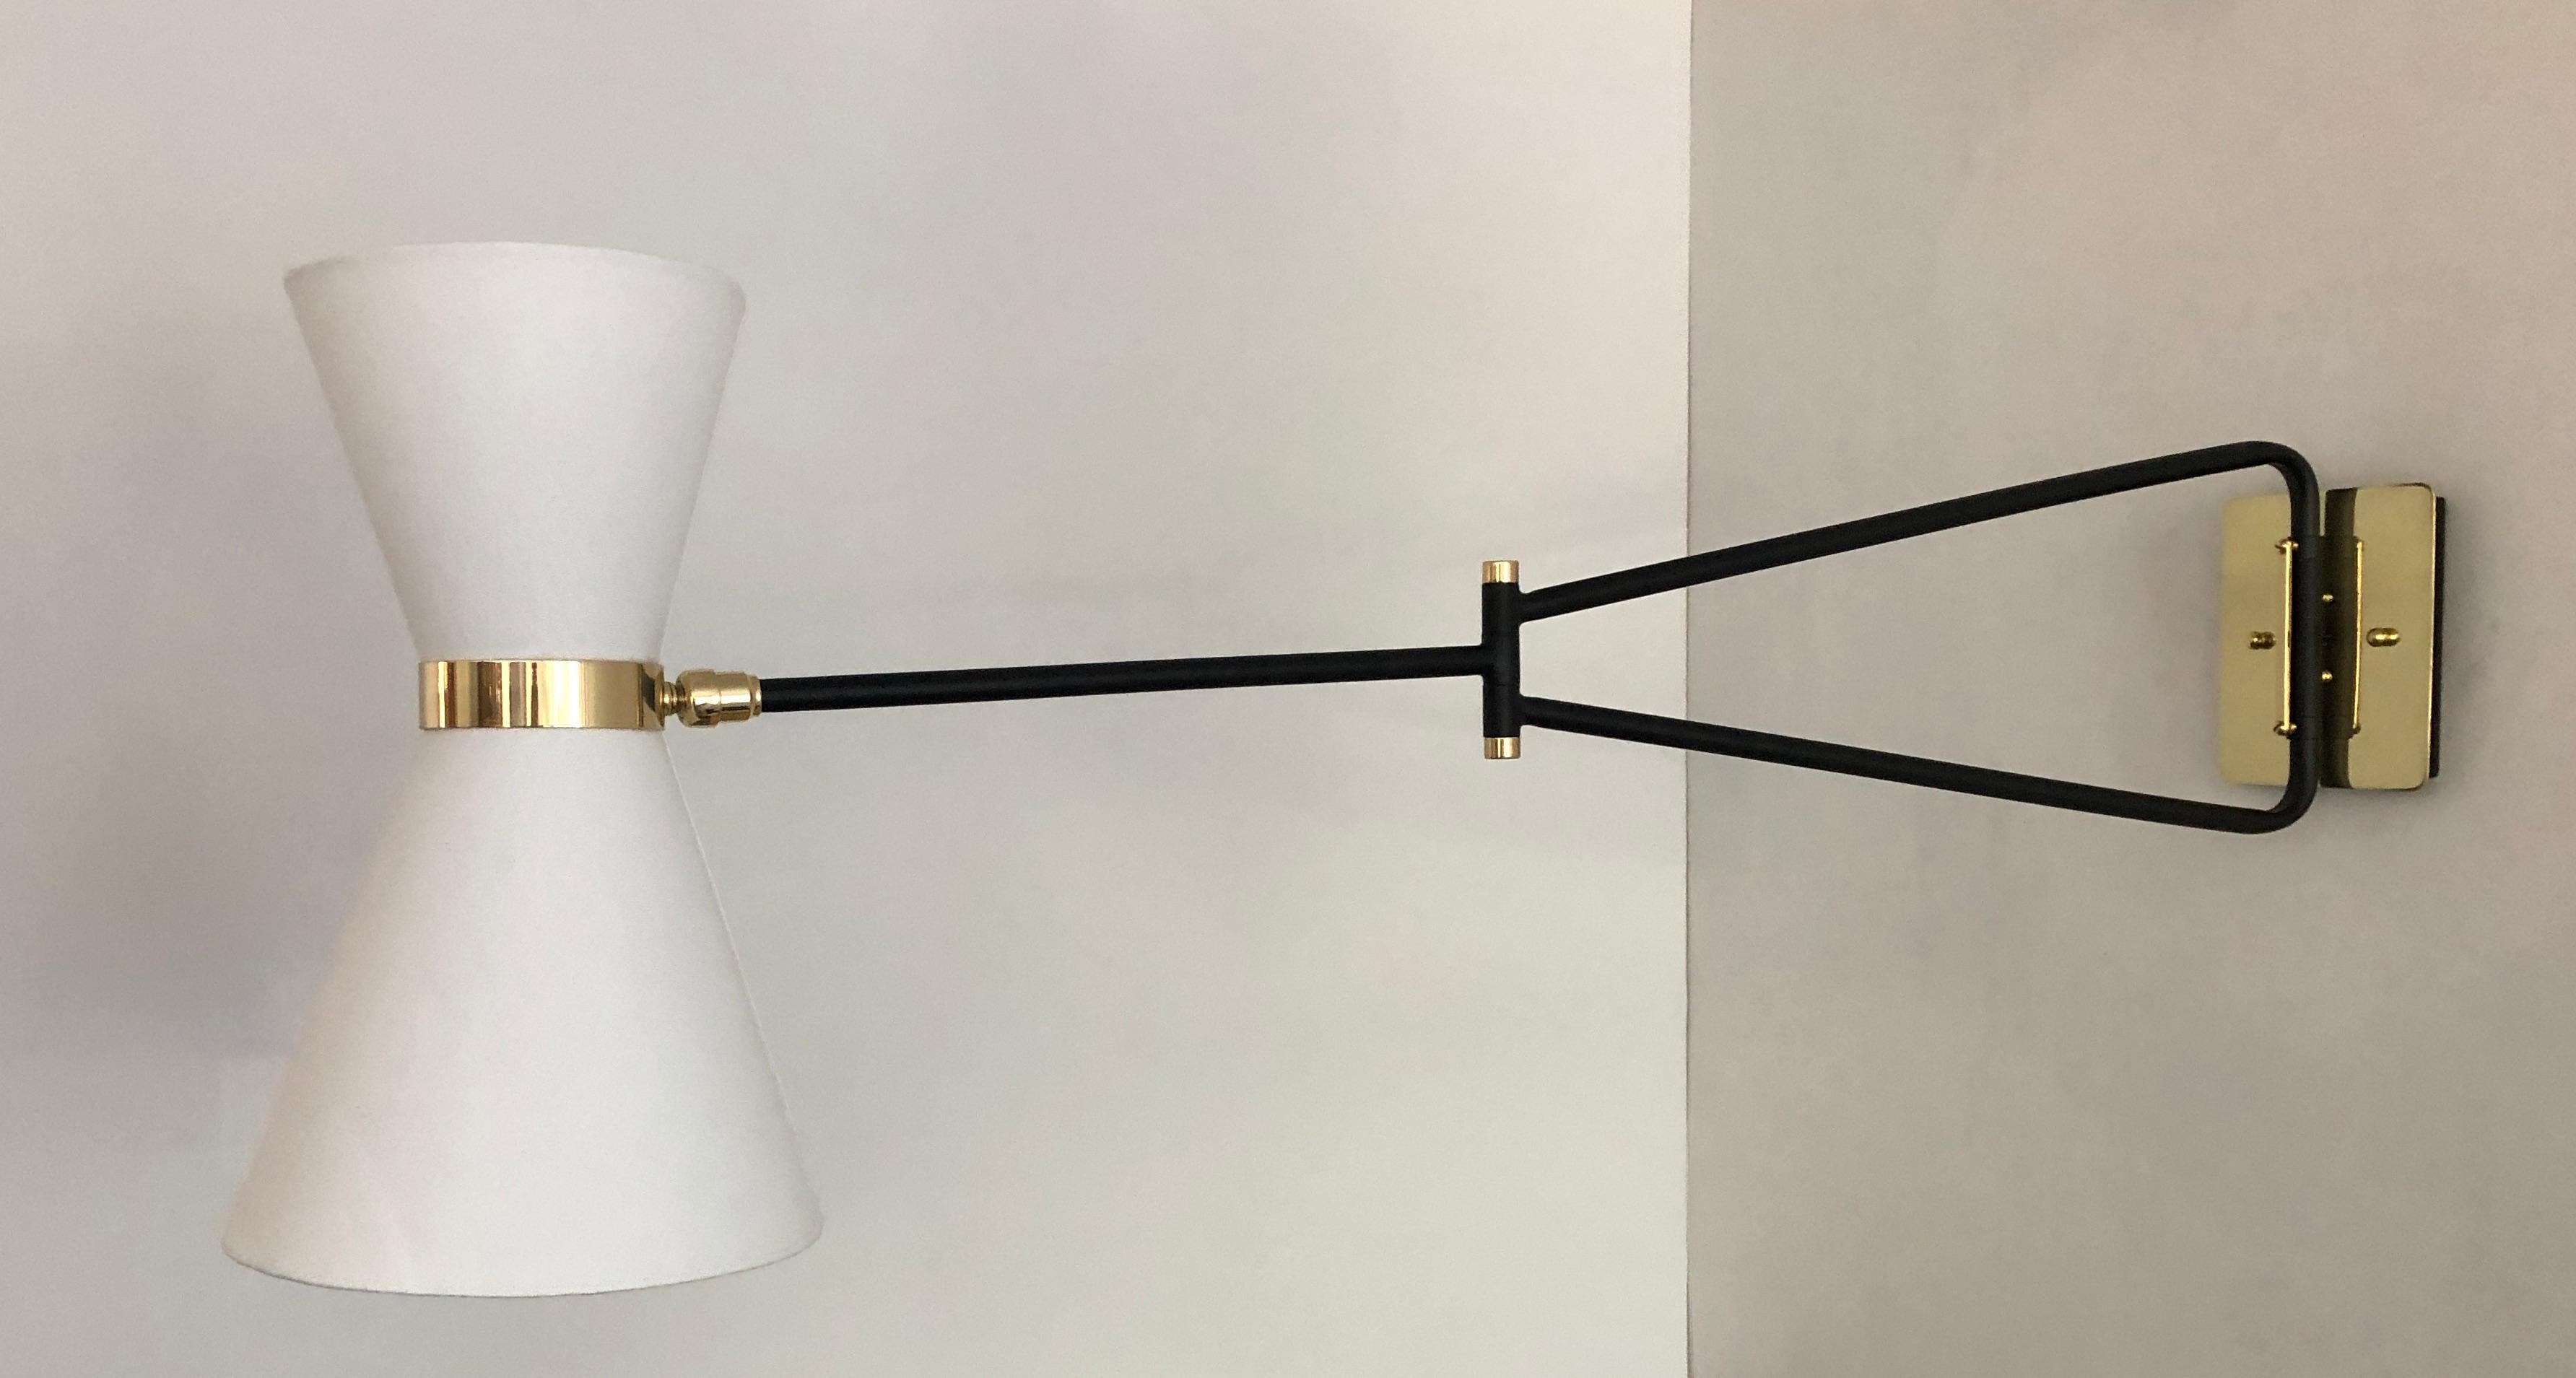 This sleek sconce is 1950s French midcentury by inspiration. The light with it double shade and articulated arm creates a versatile lighting source. The head pivots to direct the light of the two candelabra based bulbs in various direction while the